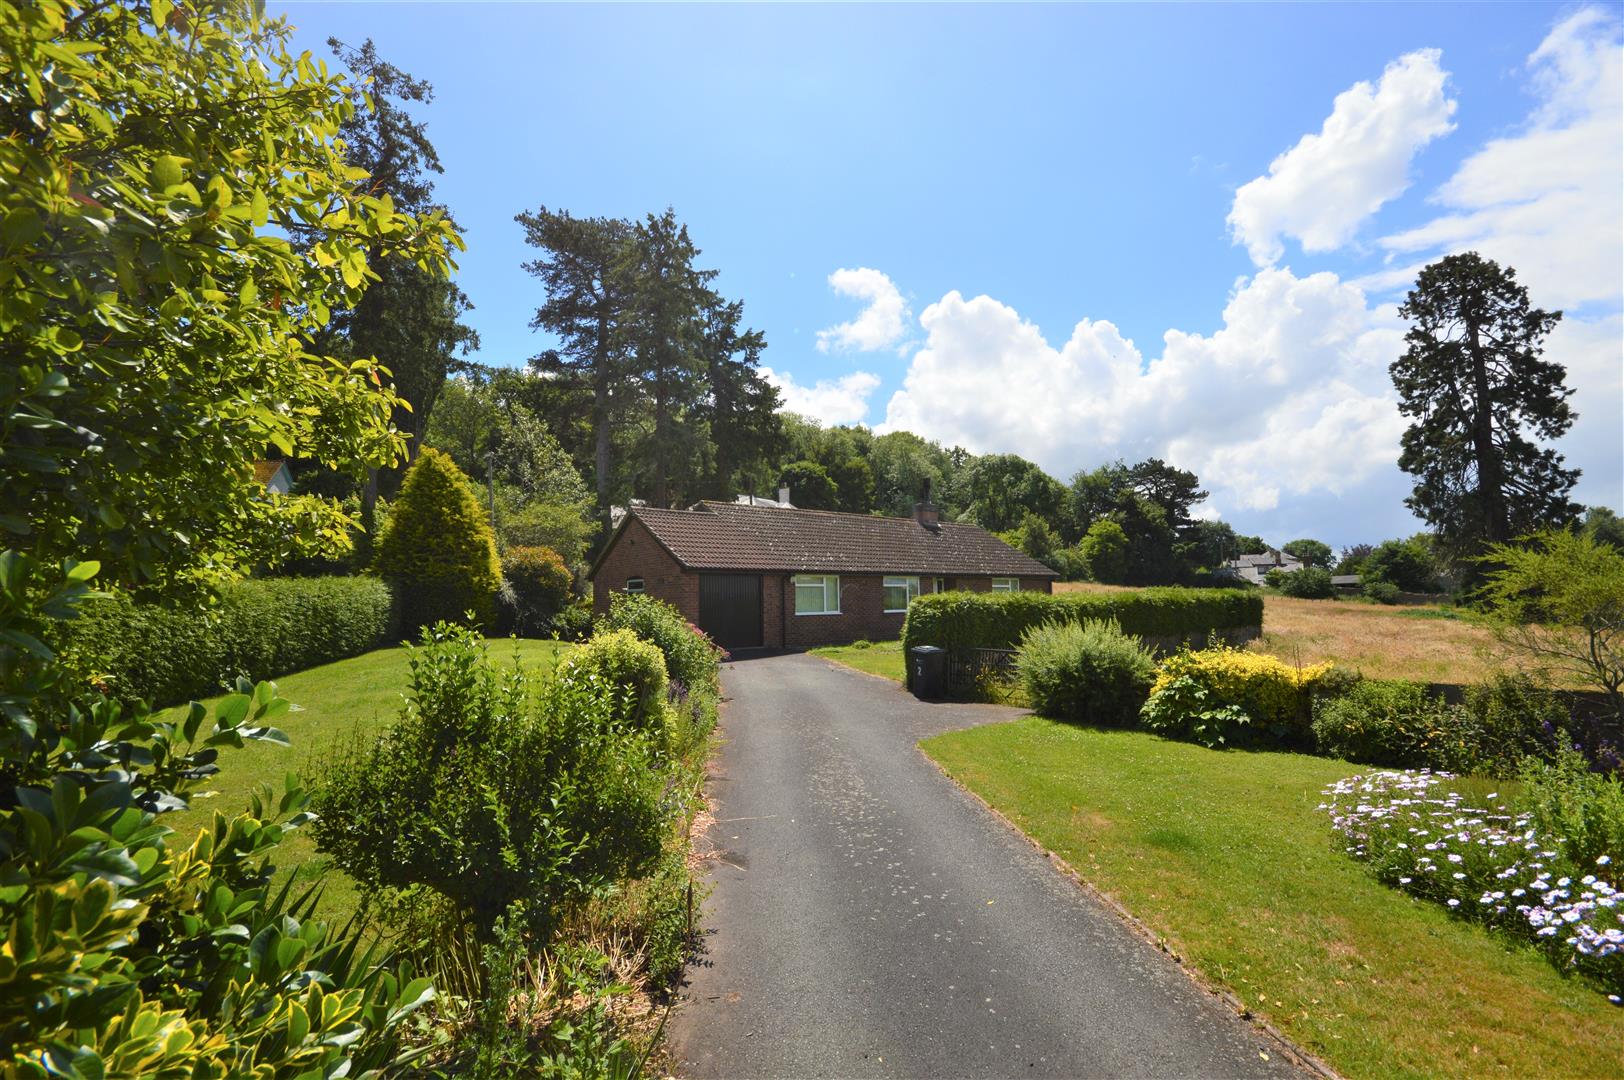 3 bed detached bungalow for sale in Leominster, HR6